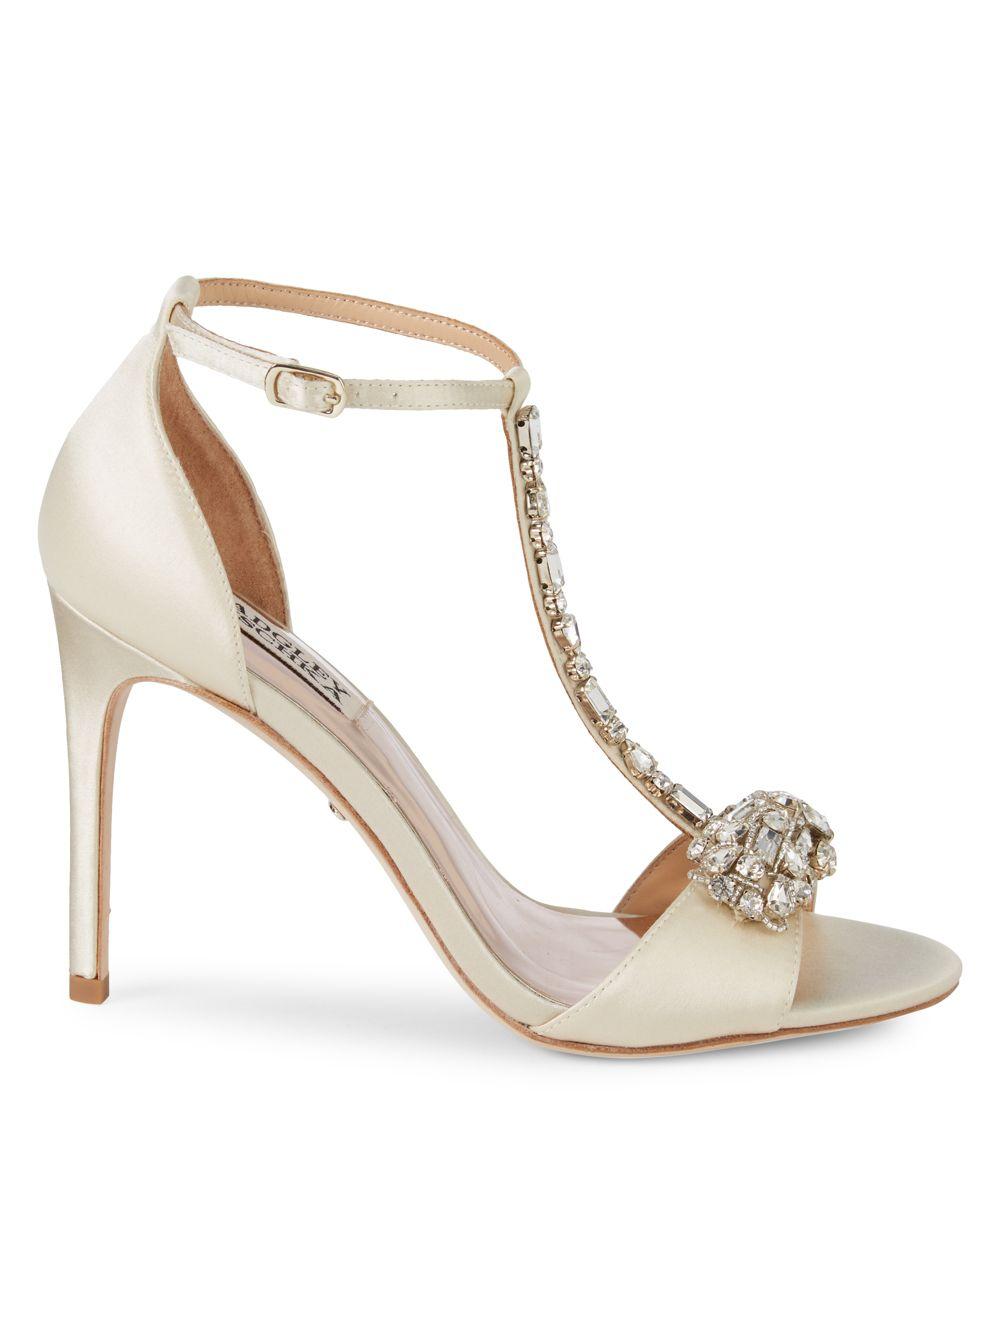 Badgley Mischka Synthetic Pascale Crystal Embellished Sandals in Ivory ...